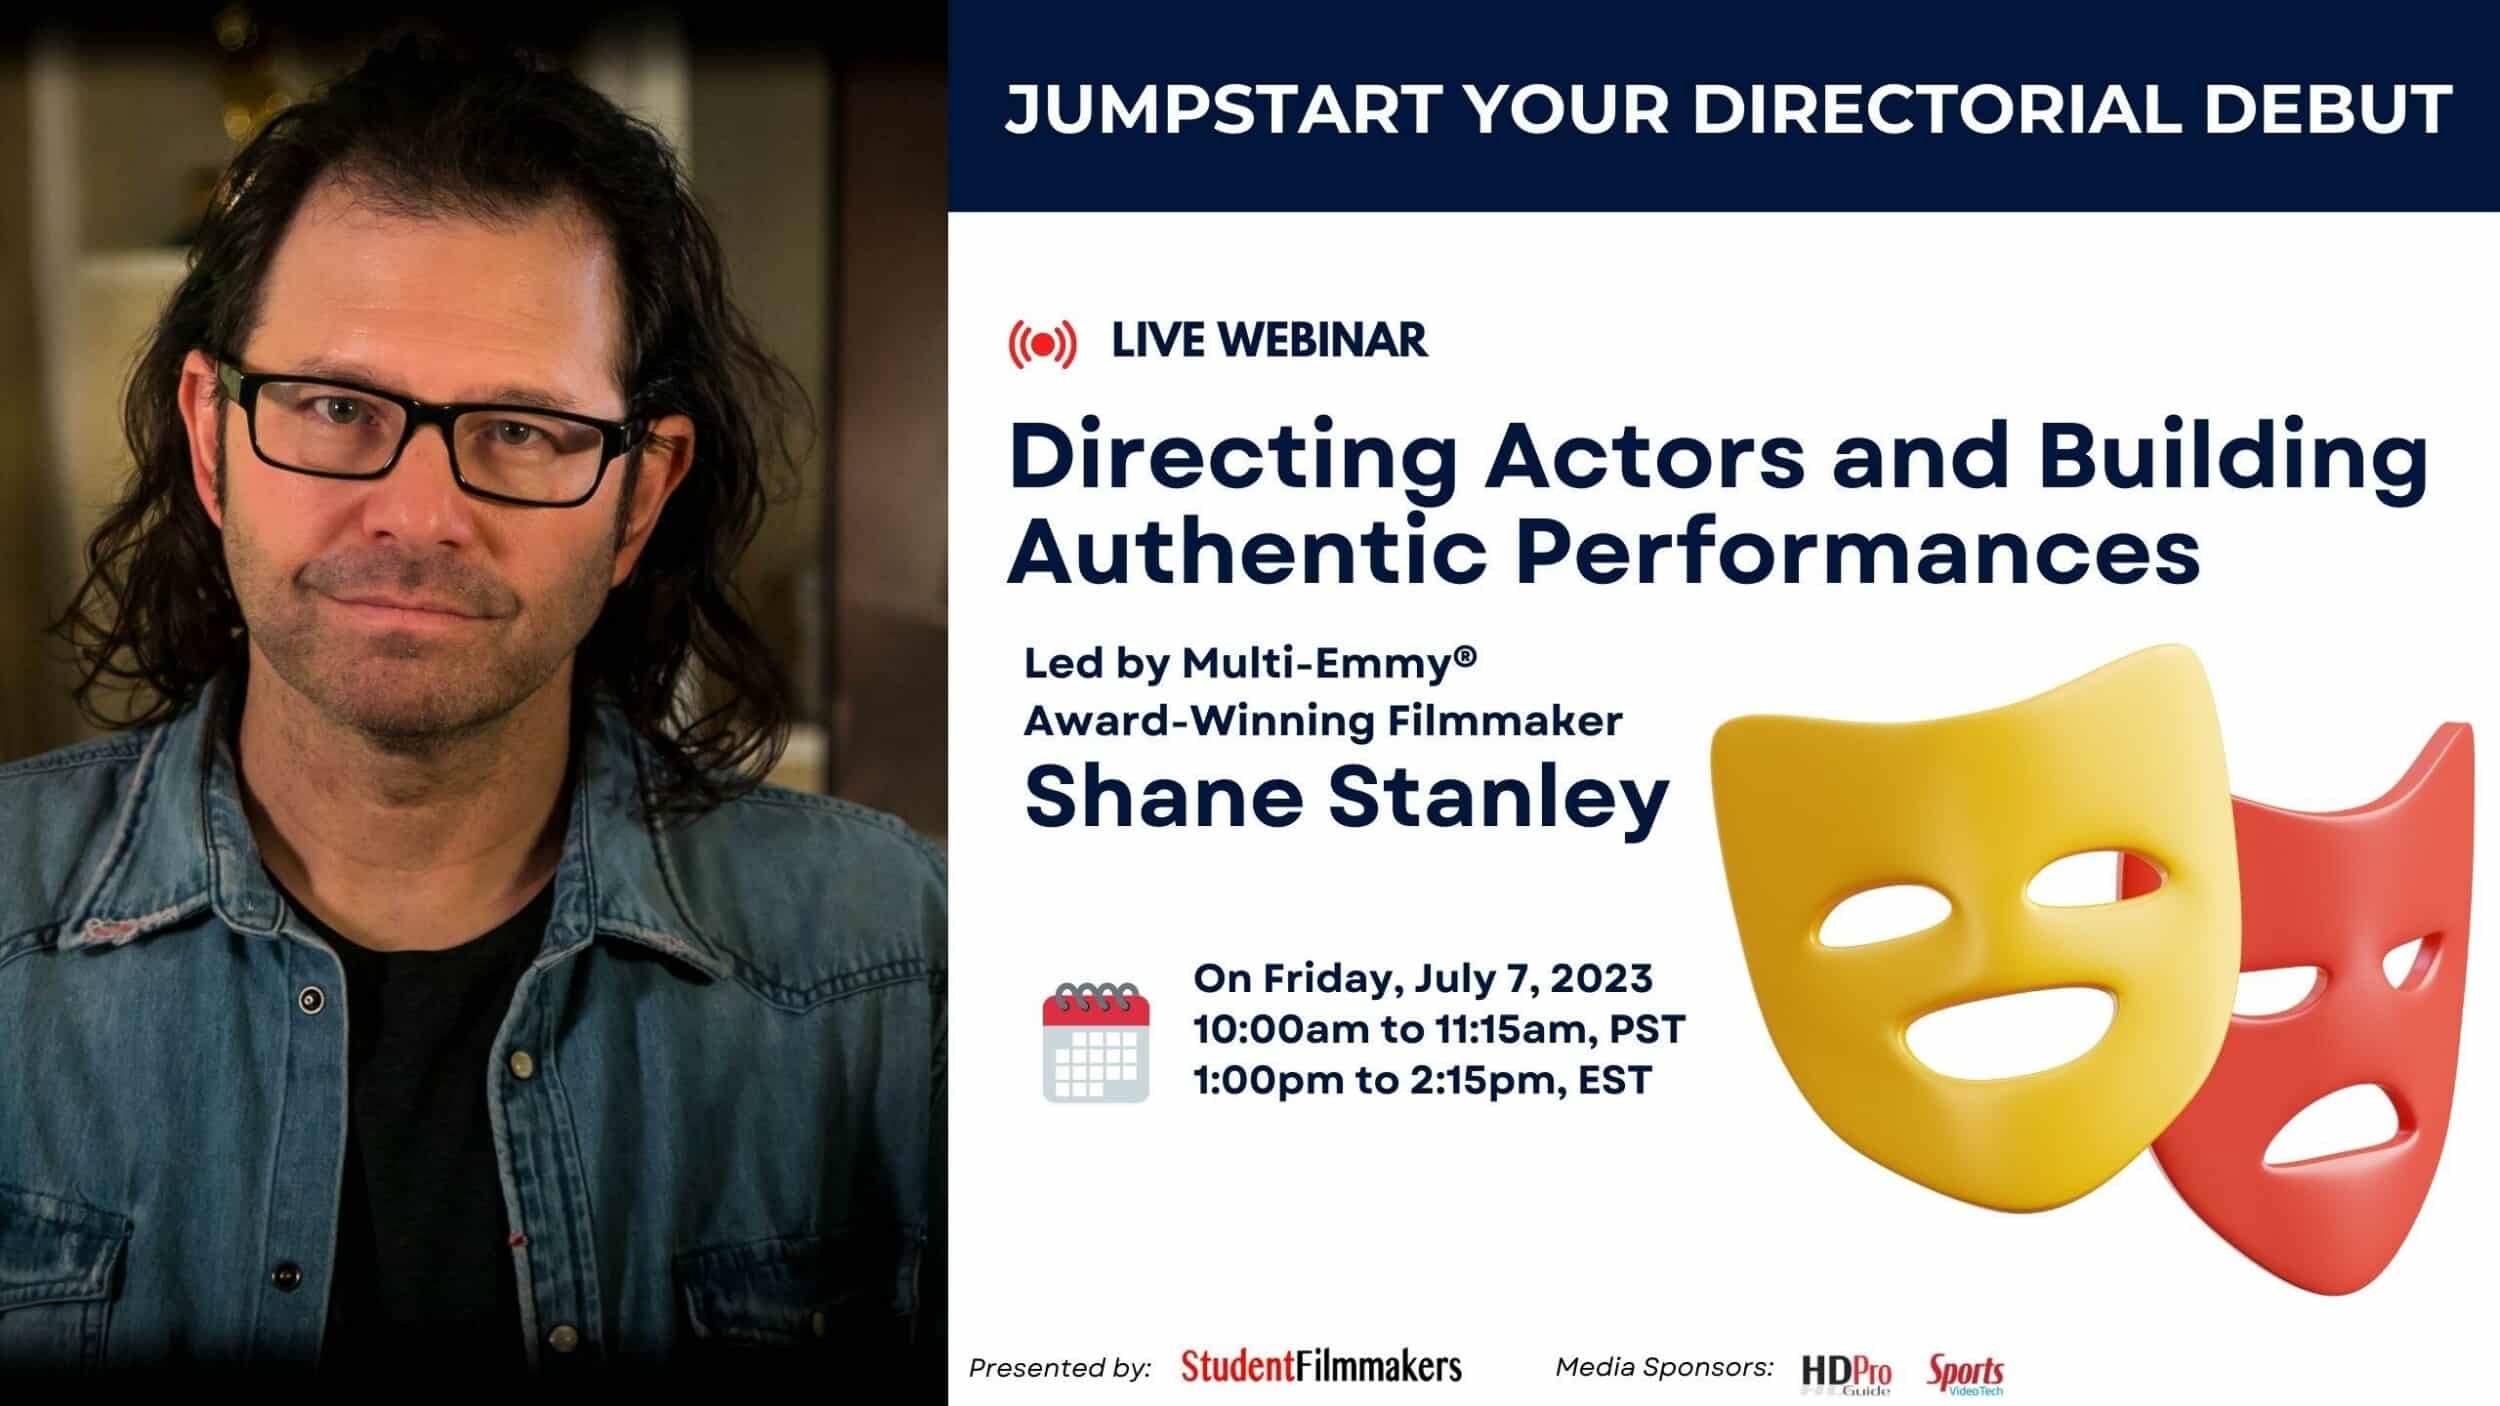 Jumpstart Your Directorial Debut: "Directing Actors and Building Authentic Performances" with Shane Stanley